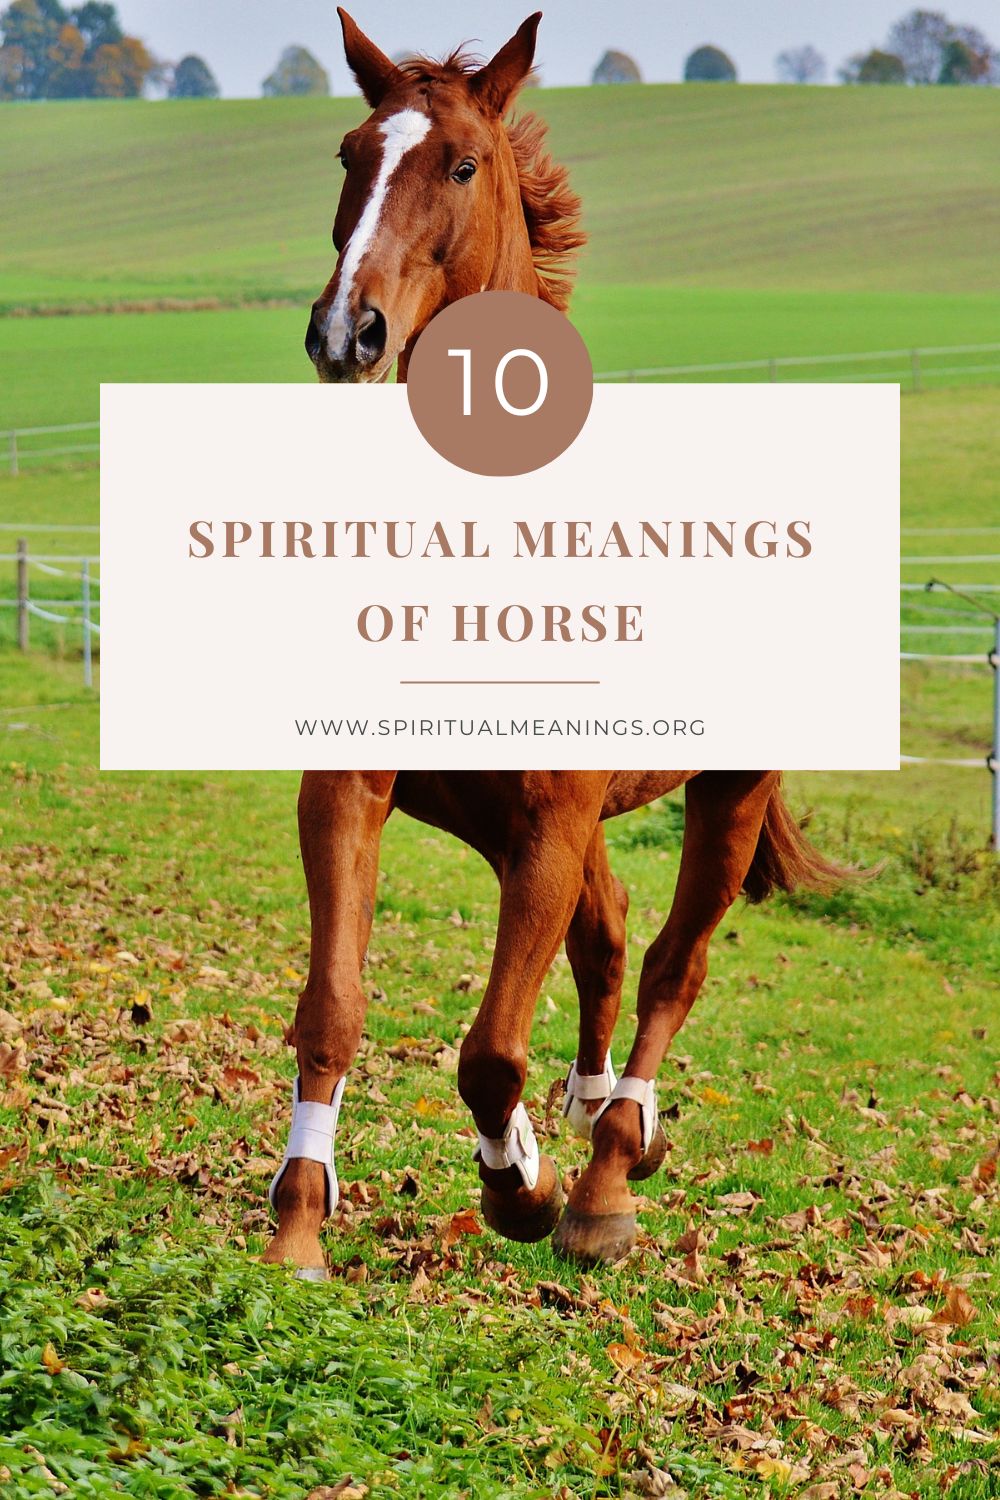 10 Spiritual Meanings of Horse